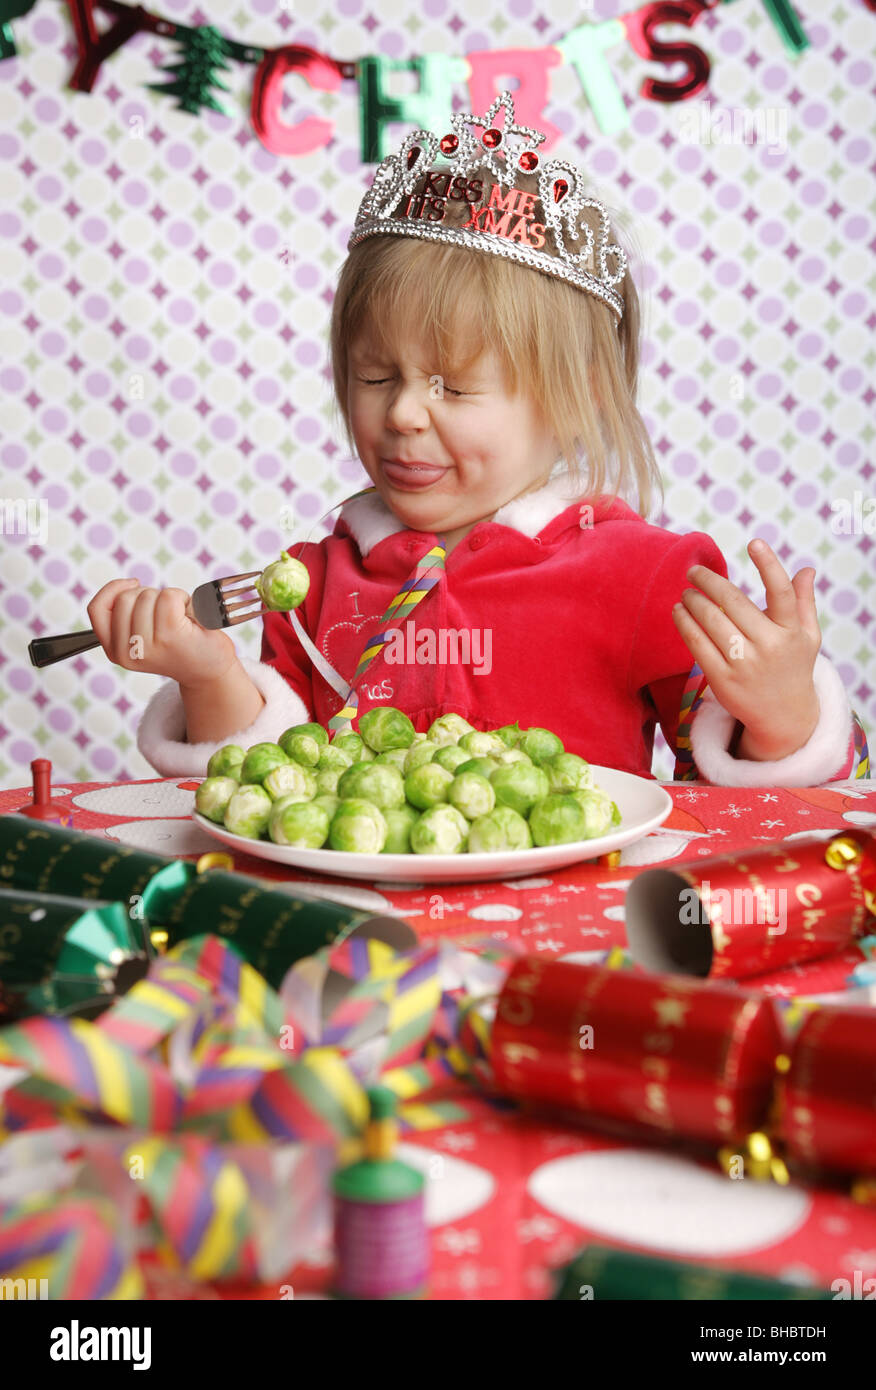 A three year old sitting at a table with Christmas decorations and a plate full of sprouts pulling a face in disgust. Stock Photo